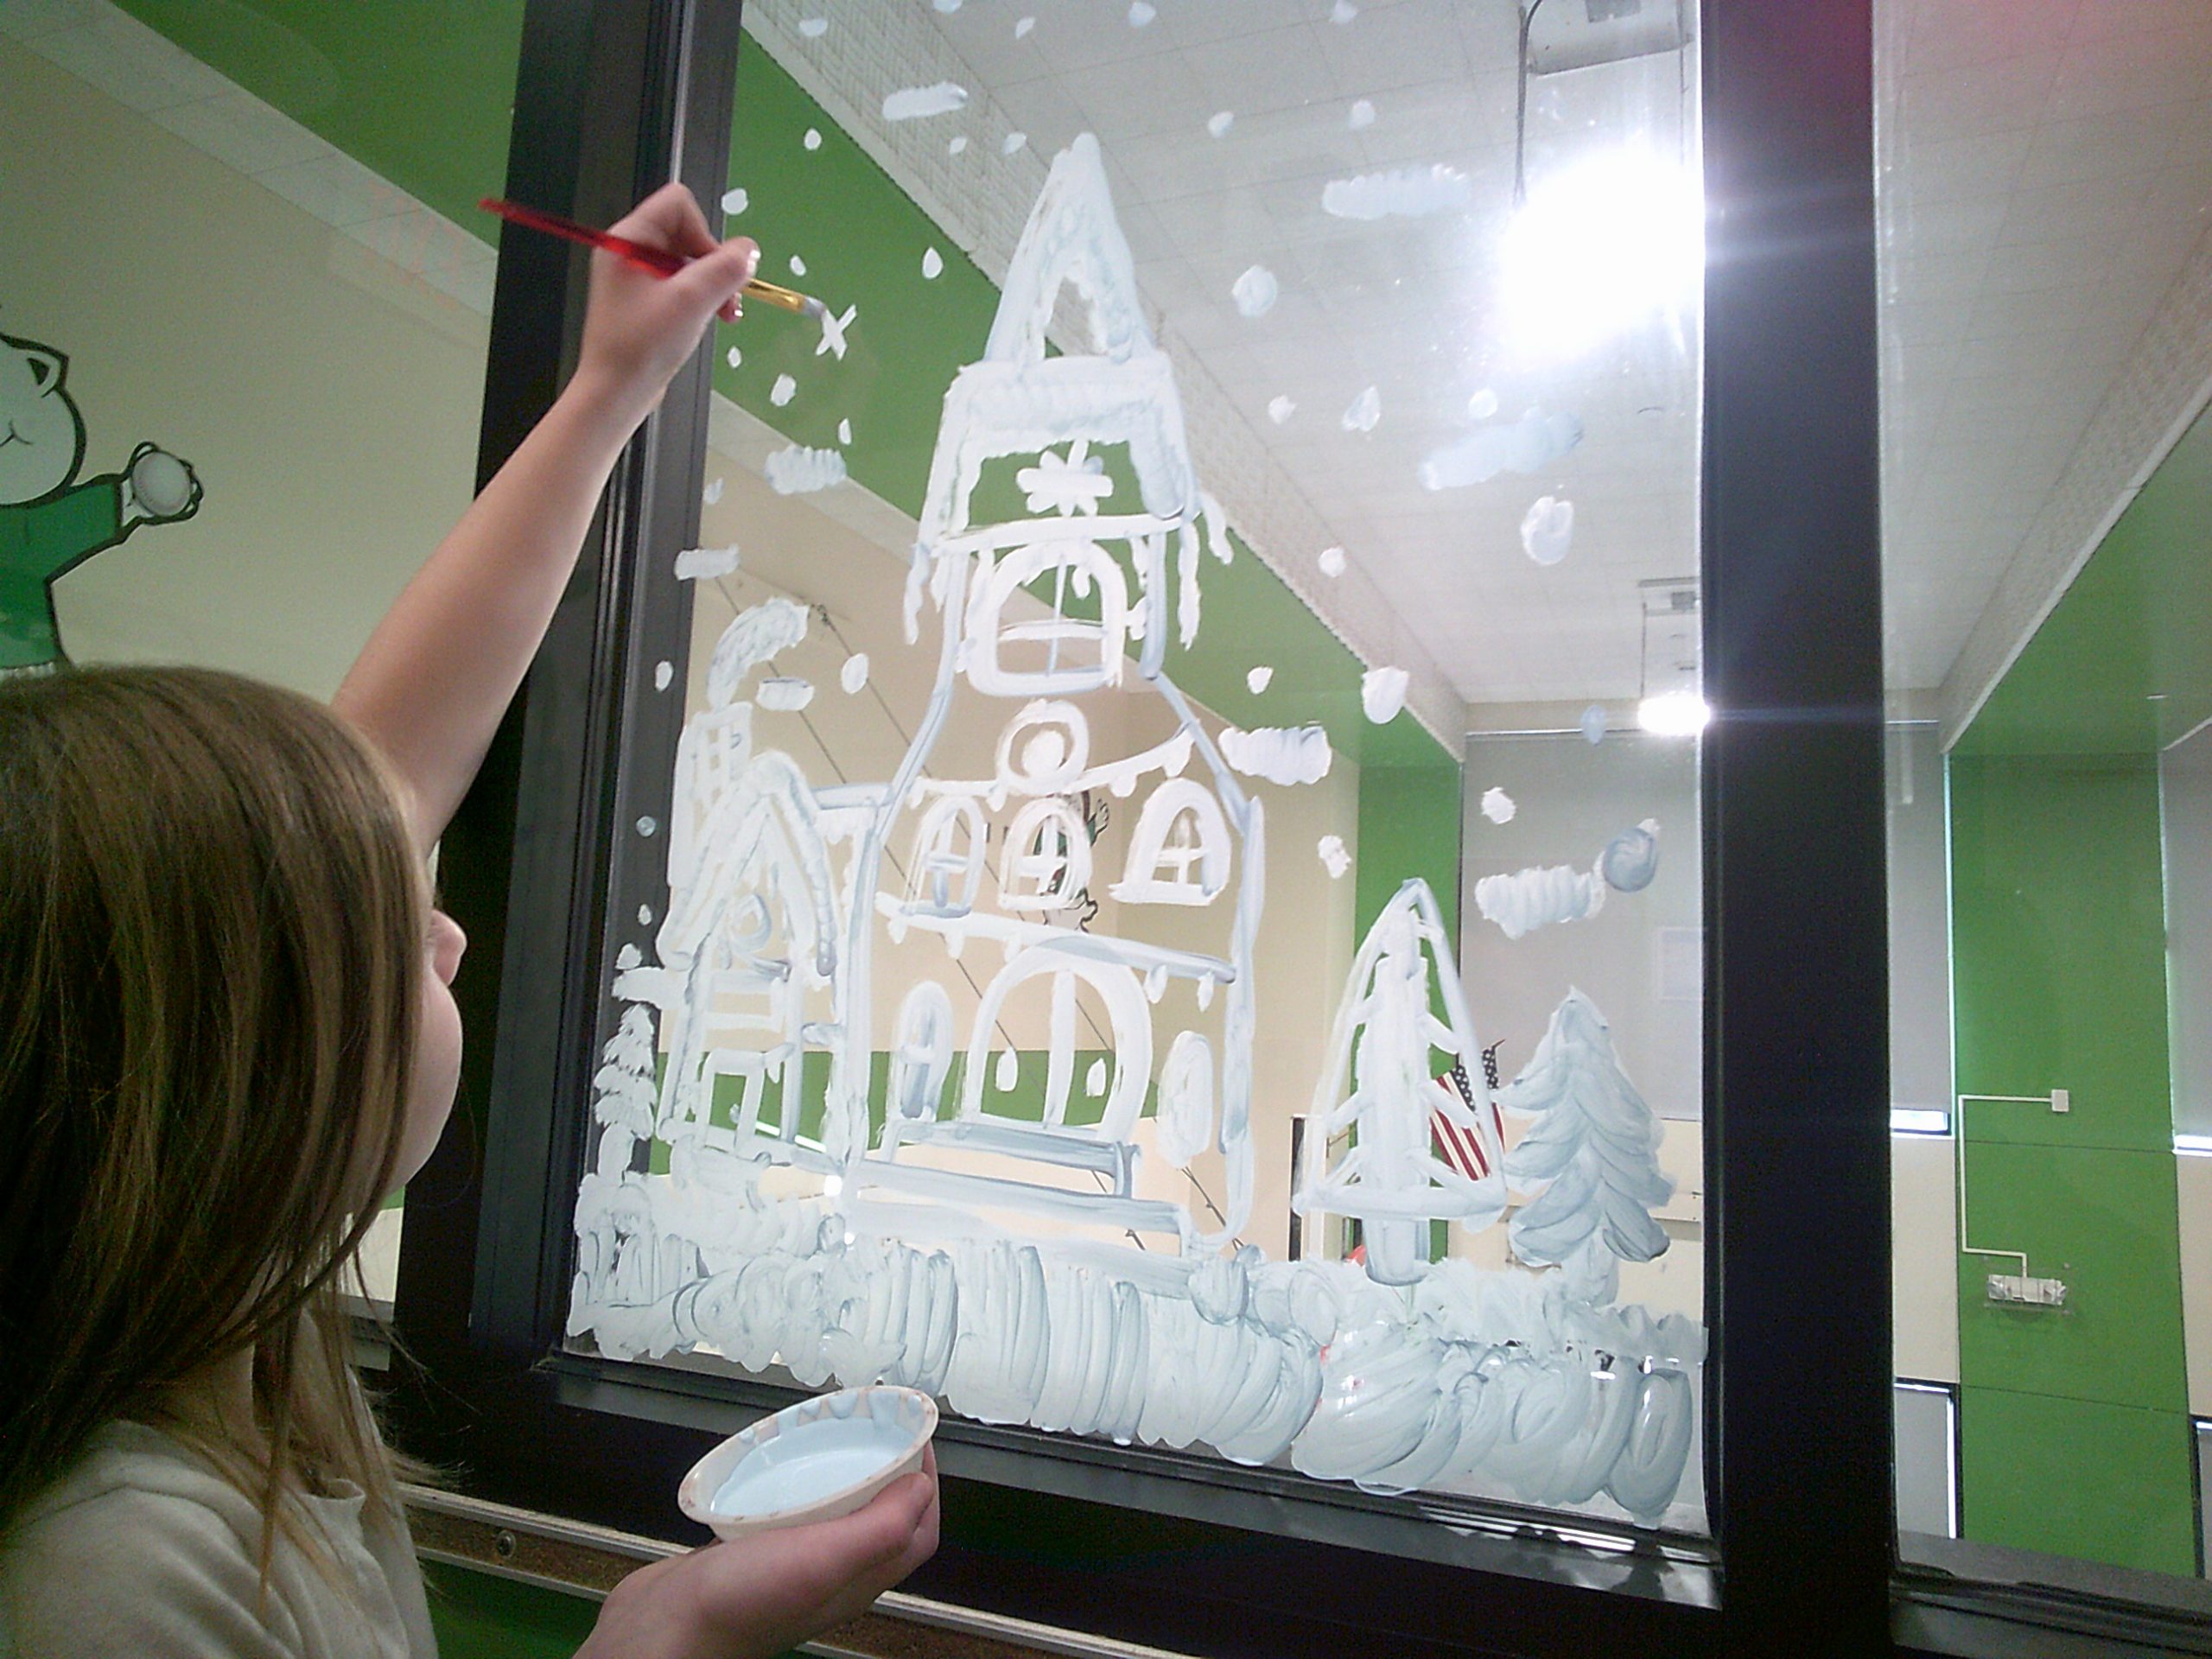 A student paints on the window during Art Club.